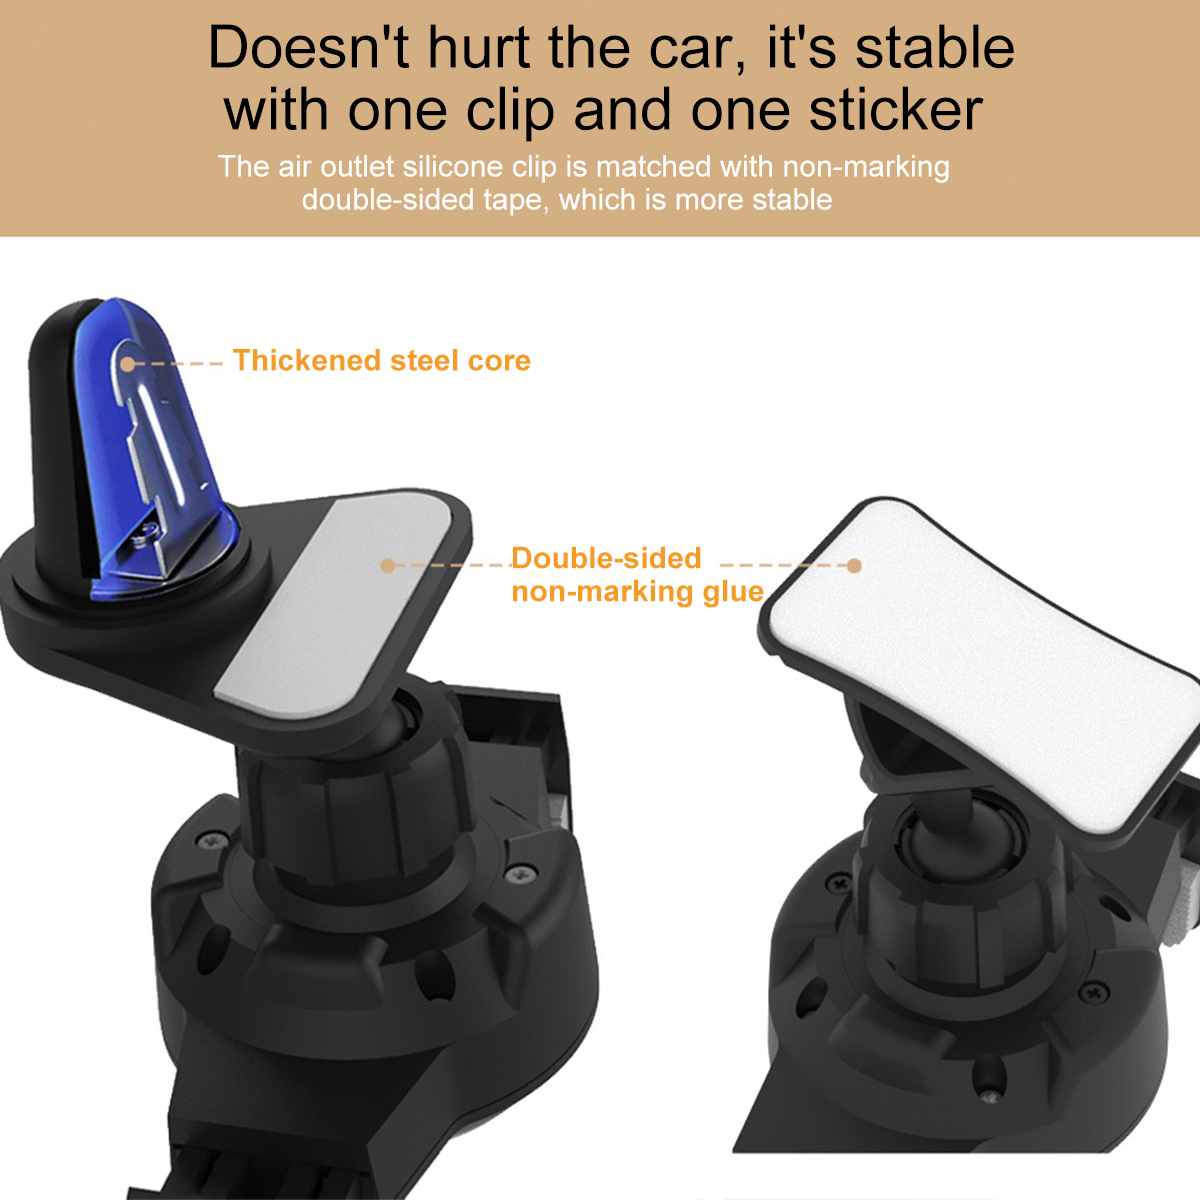 360deg-Rotation-Auto-Lock-Car-Dashboard-Air-Vent-Mobile-Phone-Holder-Stand-Bracket-for-iPhone-12-XS--1821154-6